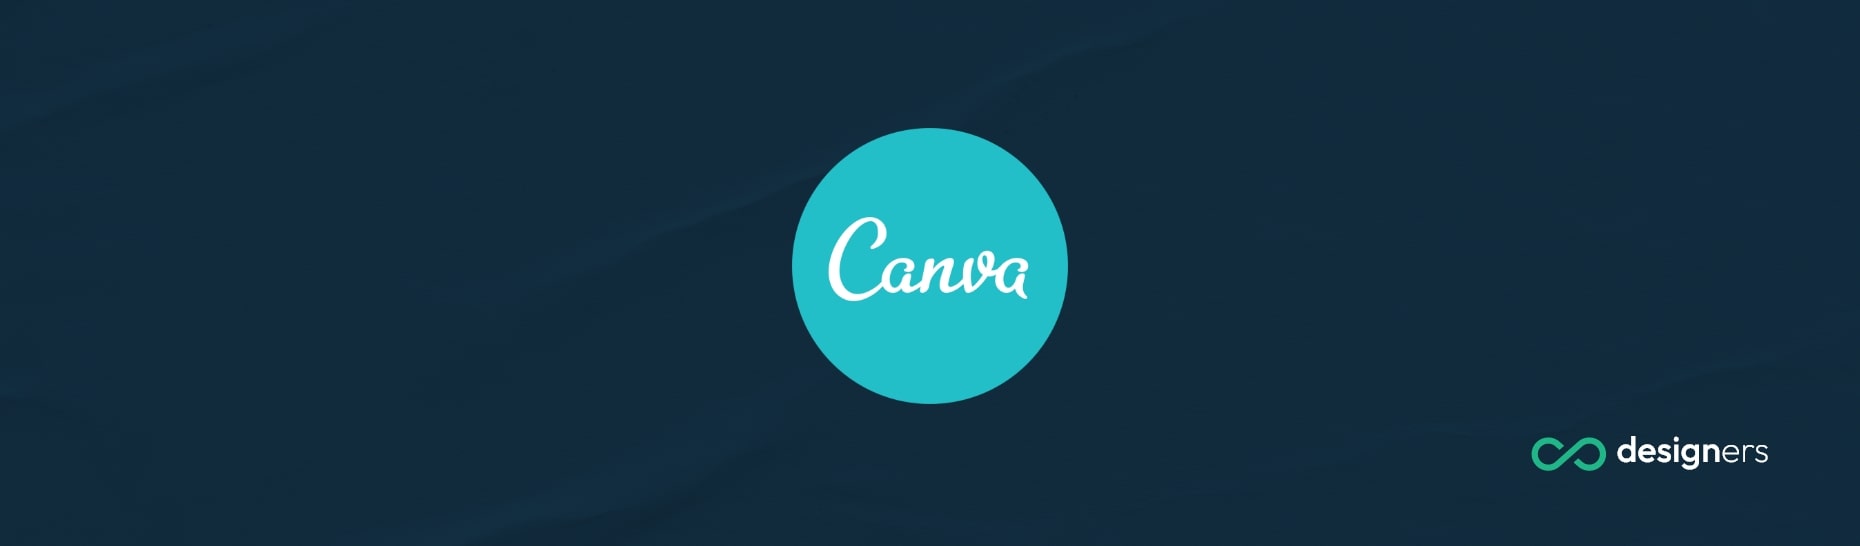 How Do I Make a Graphic Transparent in Canva?